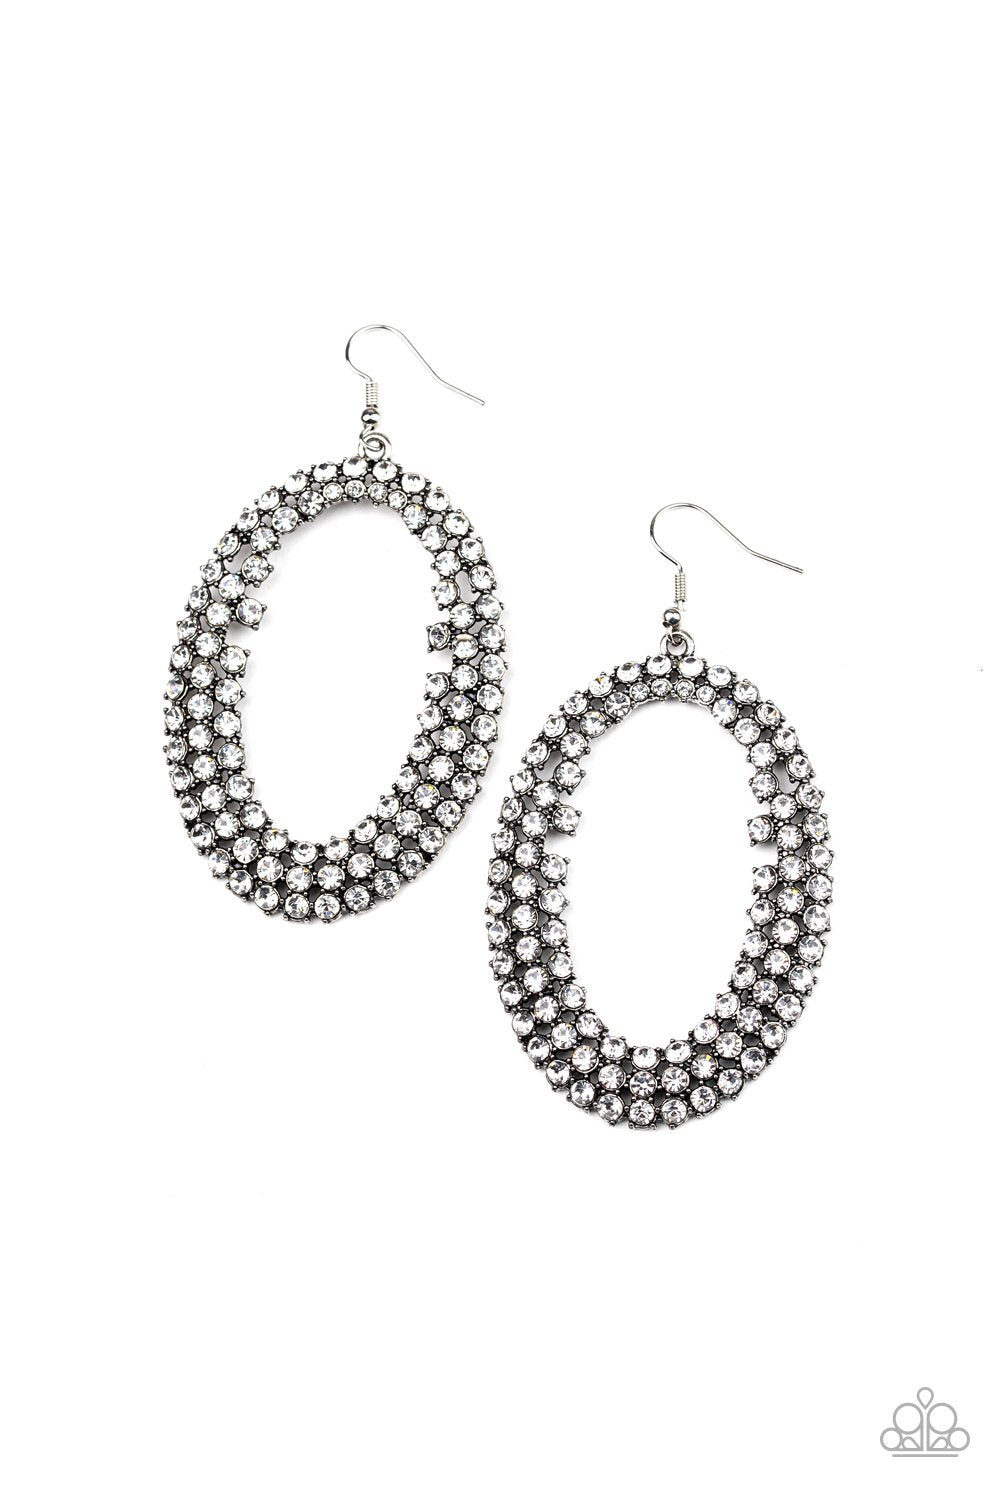 Radical Razzle White Rhinestone Earrings - Paparazzi Accessories LOTP Exclusive June 2020-CarasShop.com - $5 Jewelry by Cara Jewels